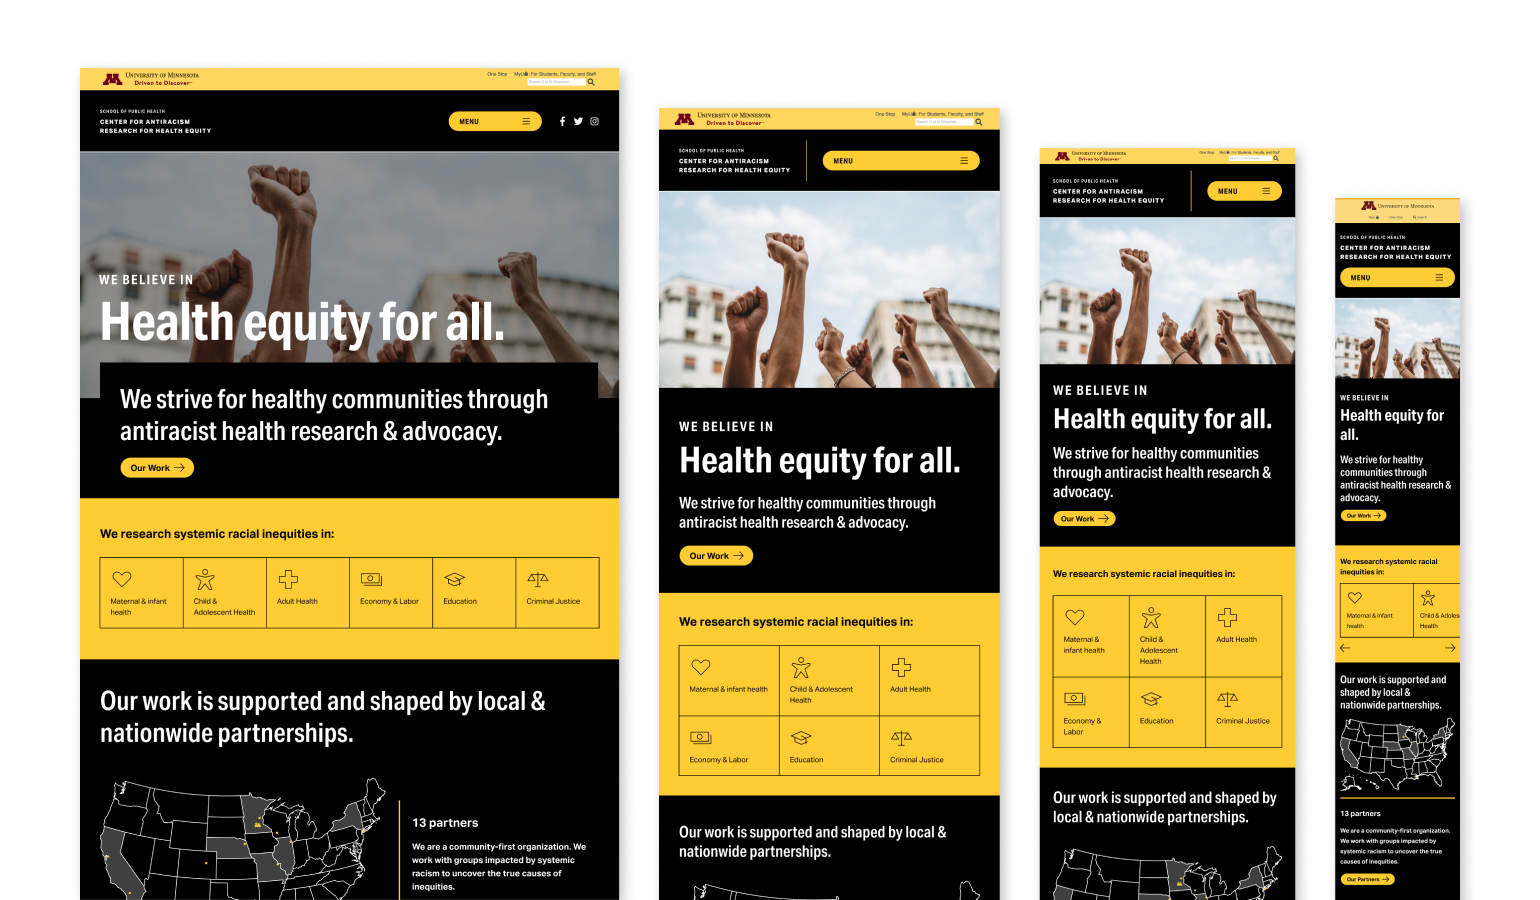 Screenshots of University of Minnesota Center for Antiracism Research for Health Equity Homepage